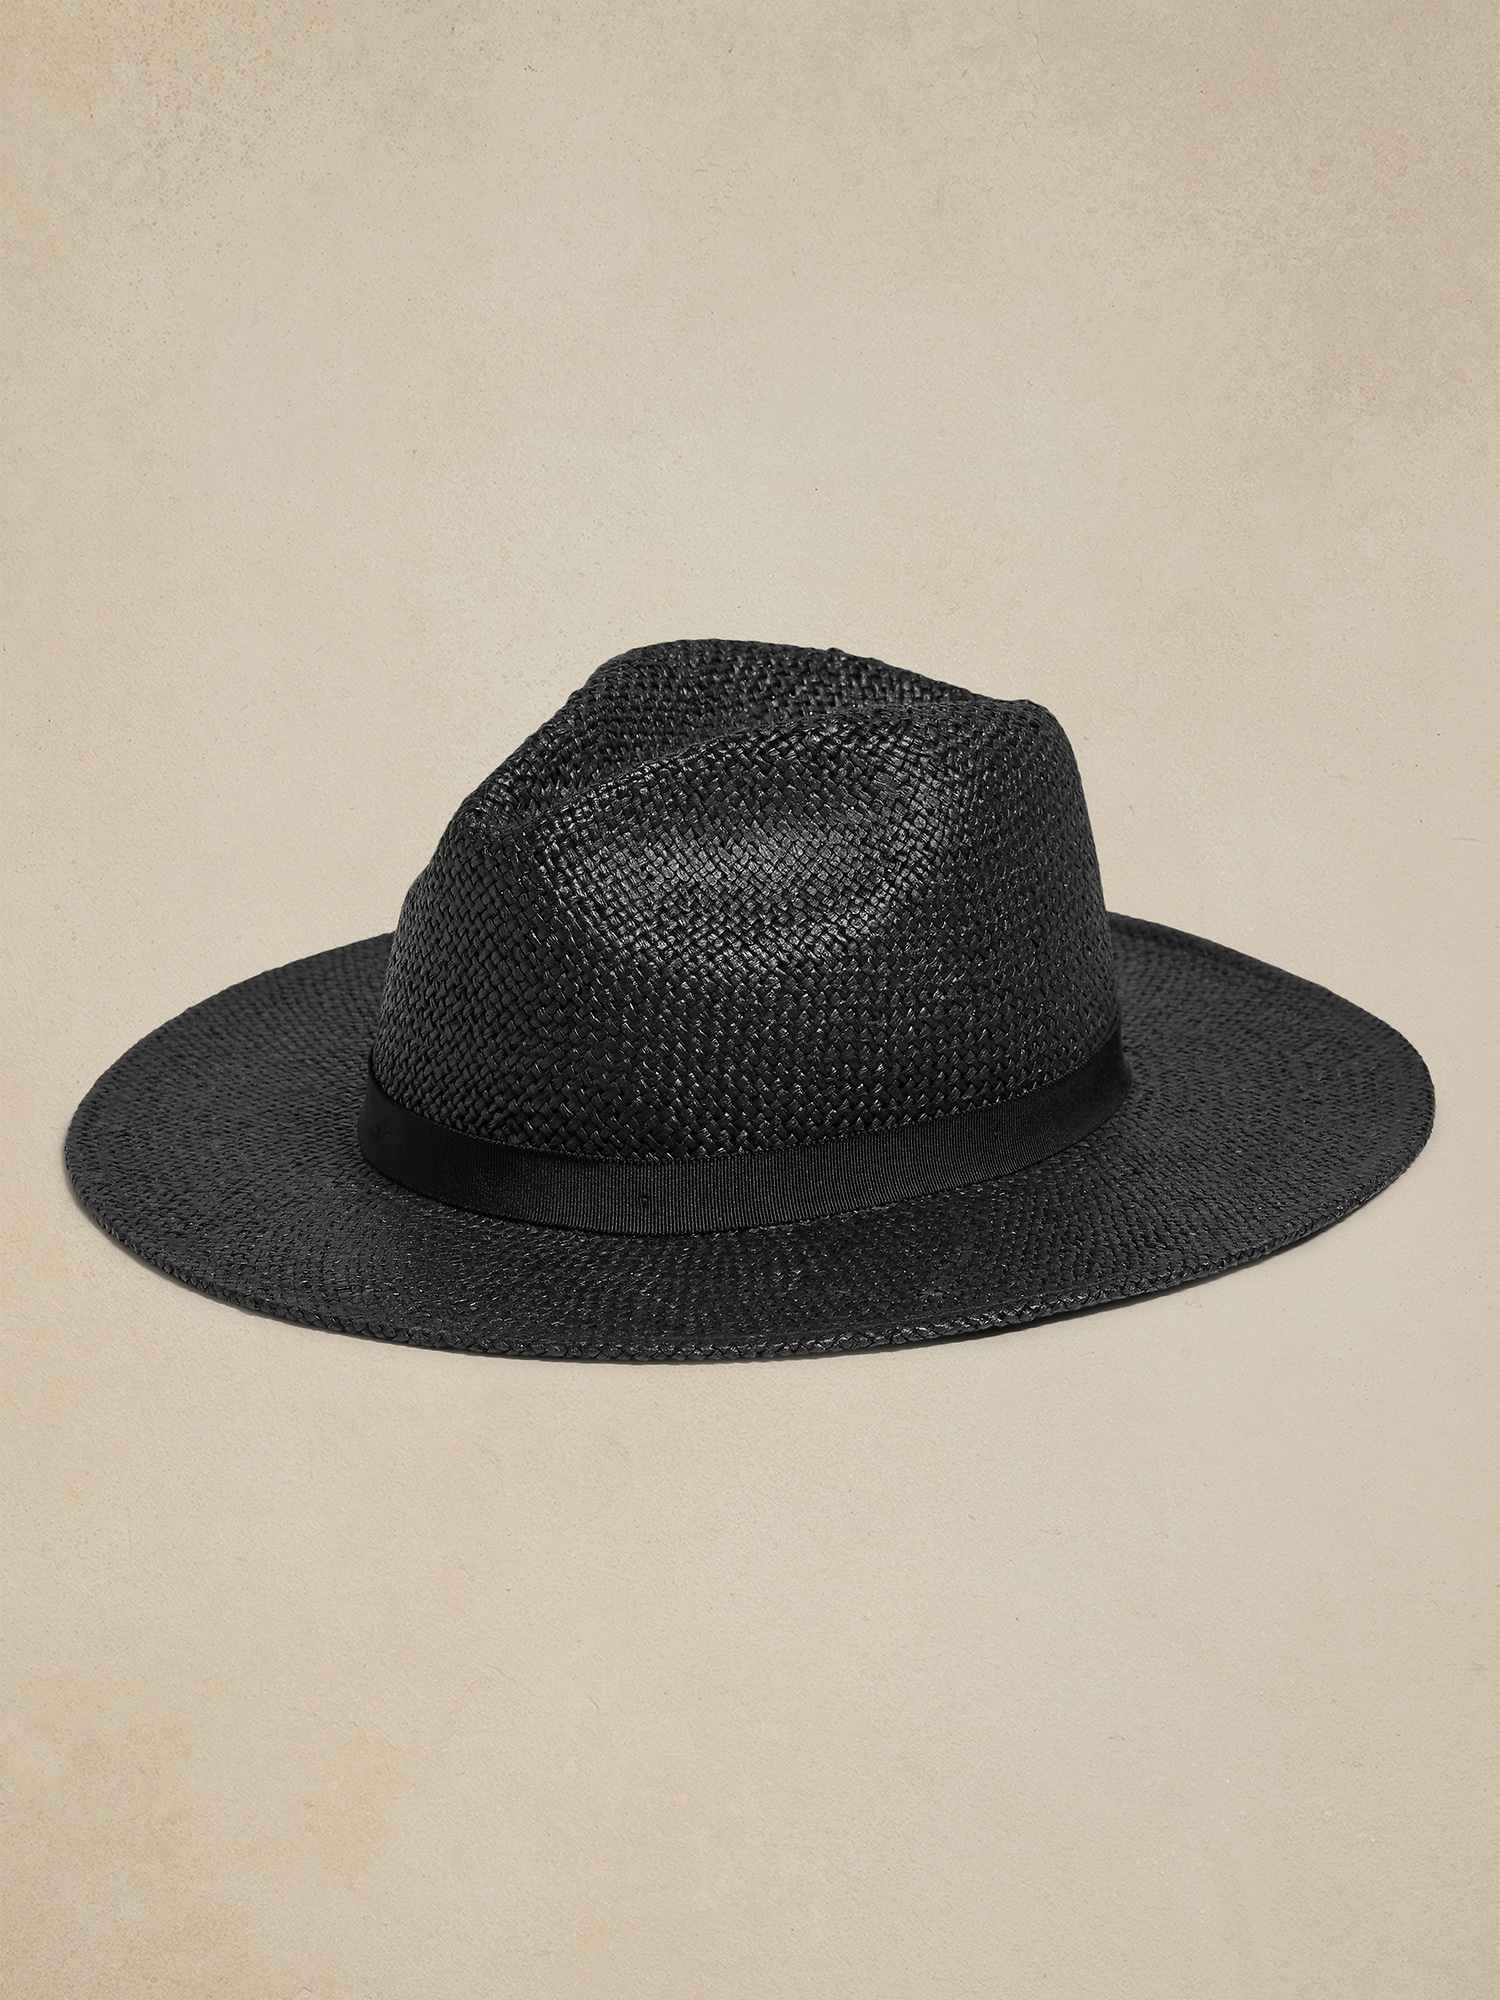 Women's Hats with Brim